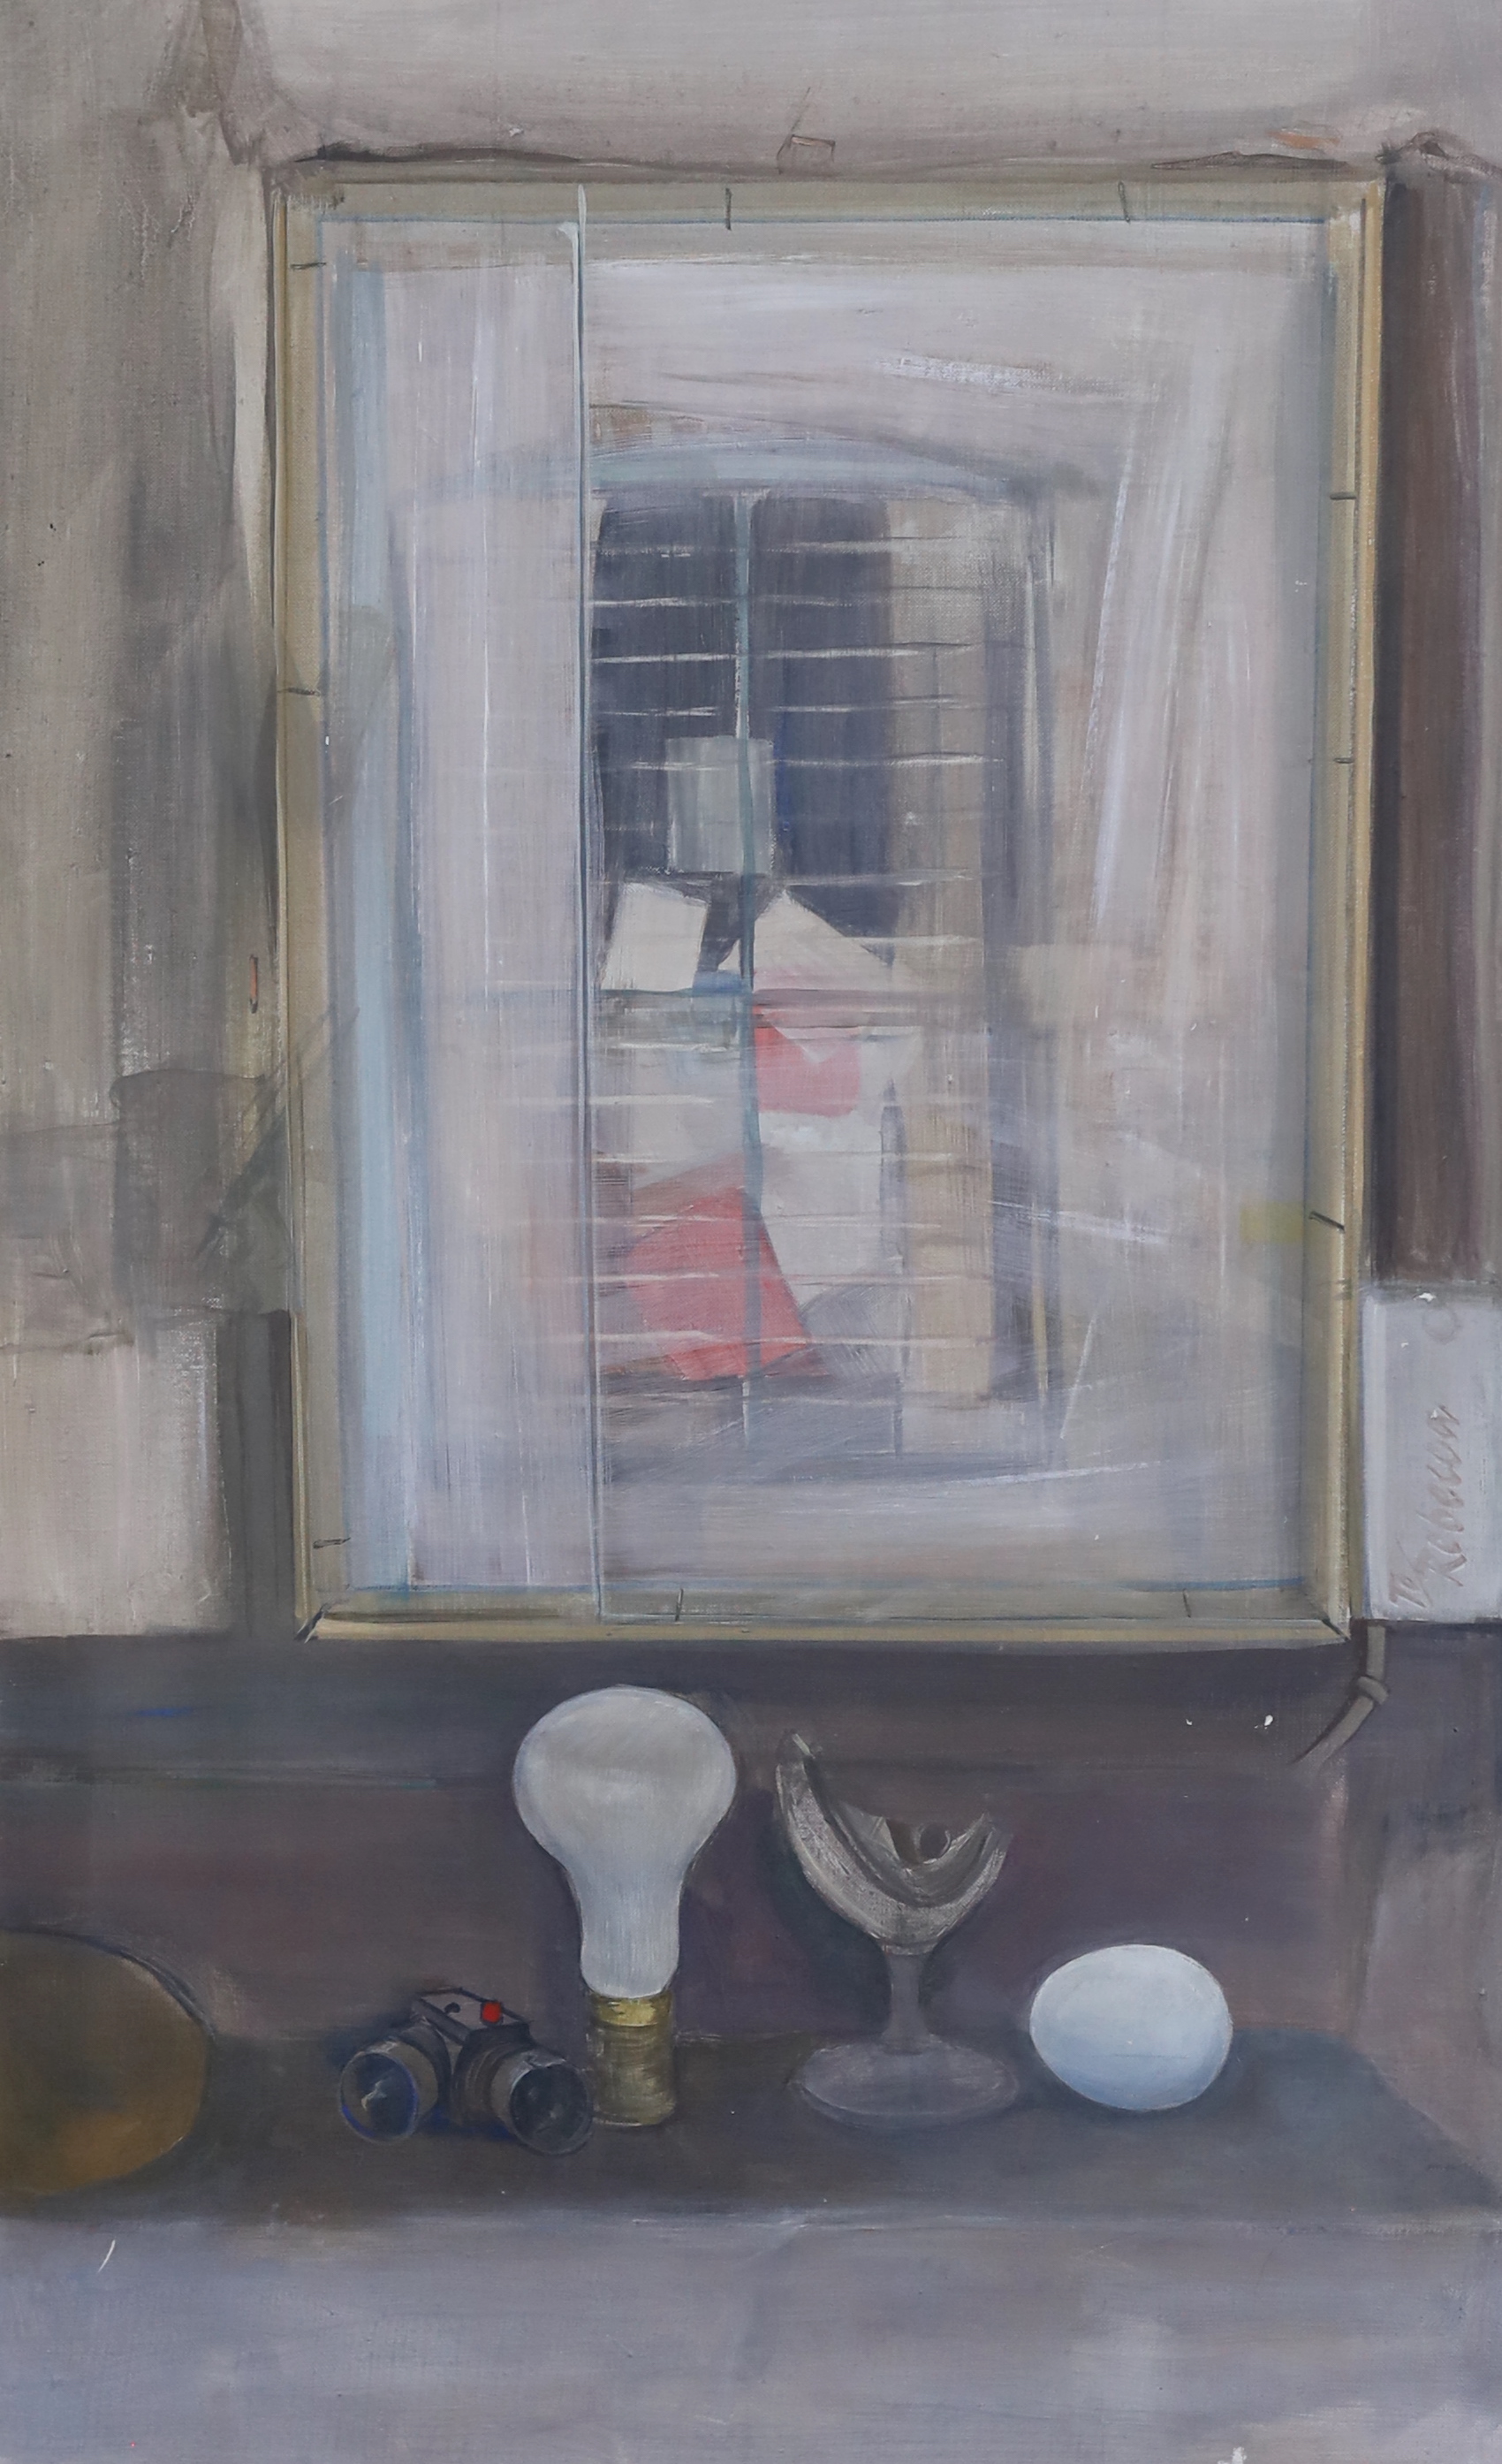 David Tindle R.A. (British, b.1932), Objects before a window, oil on canvas, 74 x 46cm